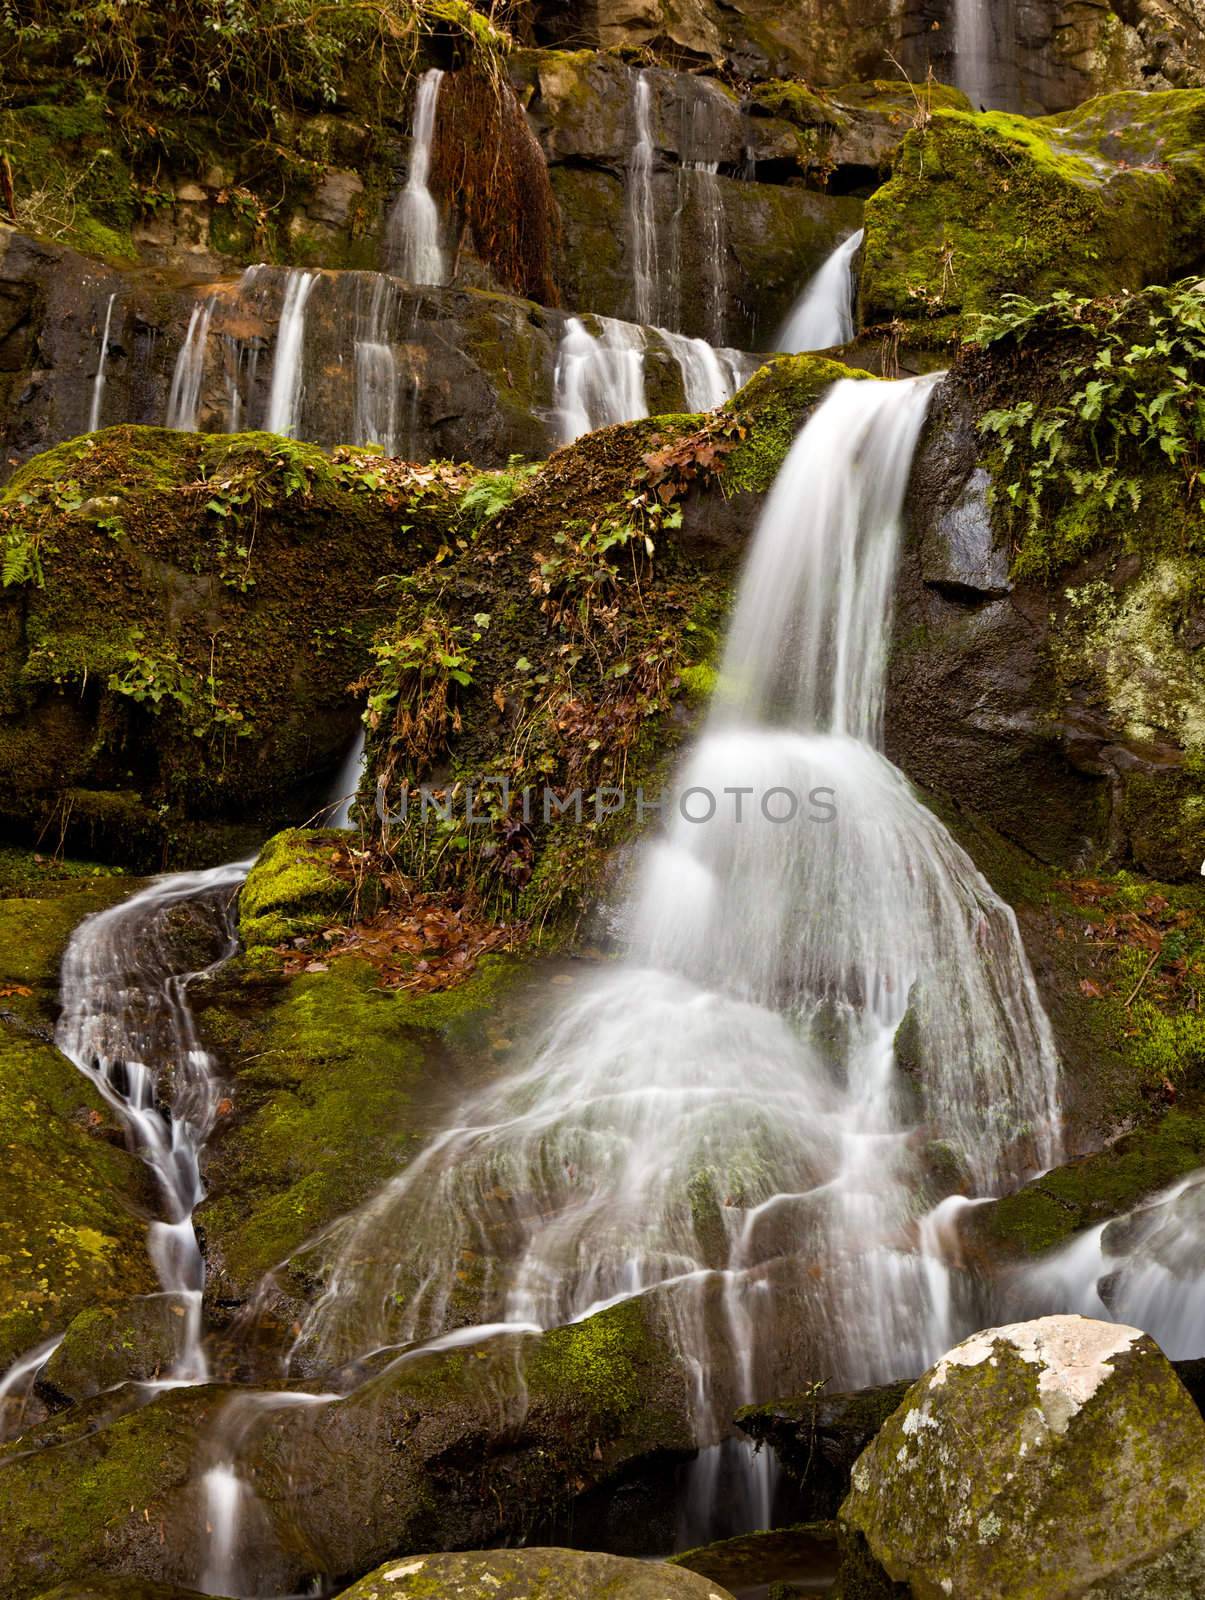 Waterfall in the place of a thousand drips near Gatlinburg in Smoky Mountains